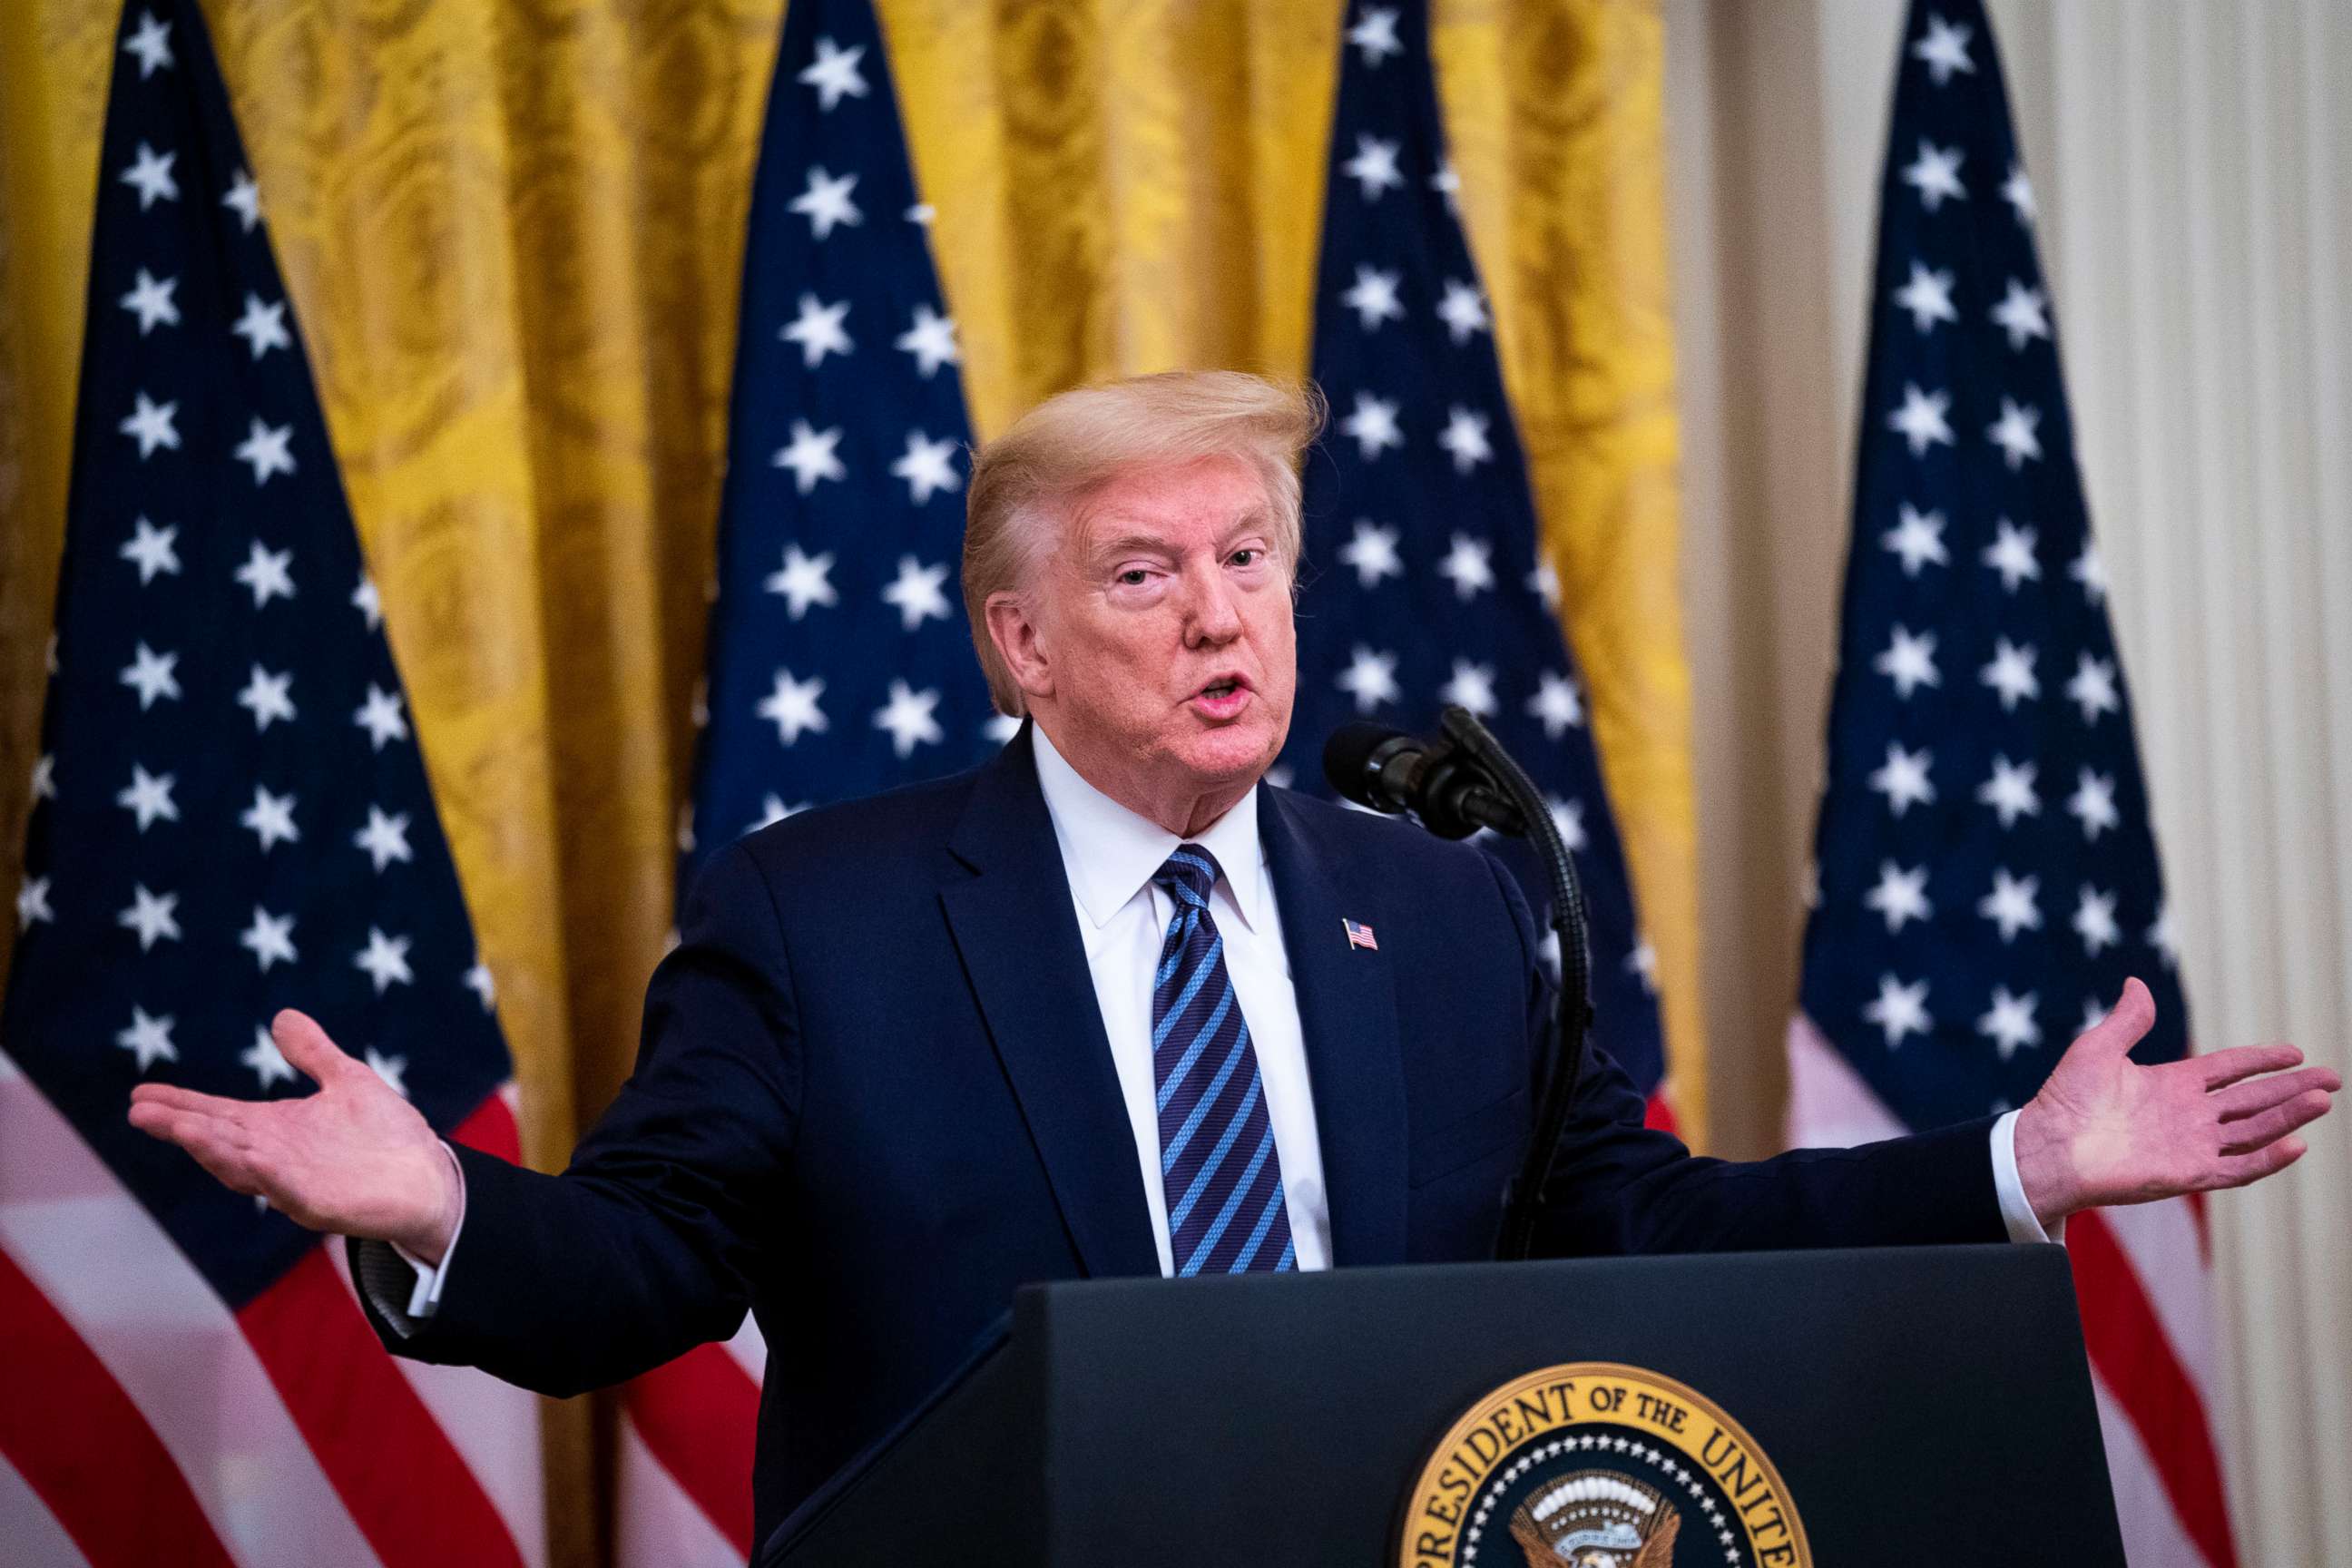 PHOTO: President Donald Trump delivers remarks at the White House in Washington, during an event about protecting America's seniors, Thursday, April 30, 2020.